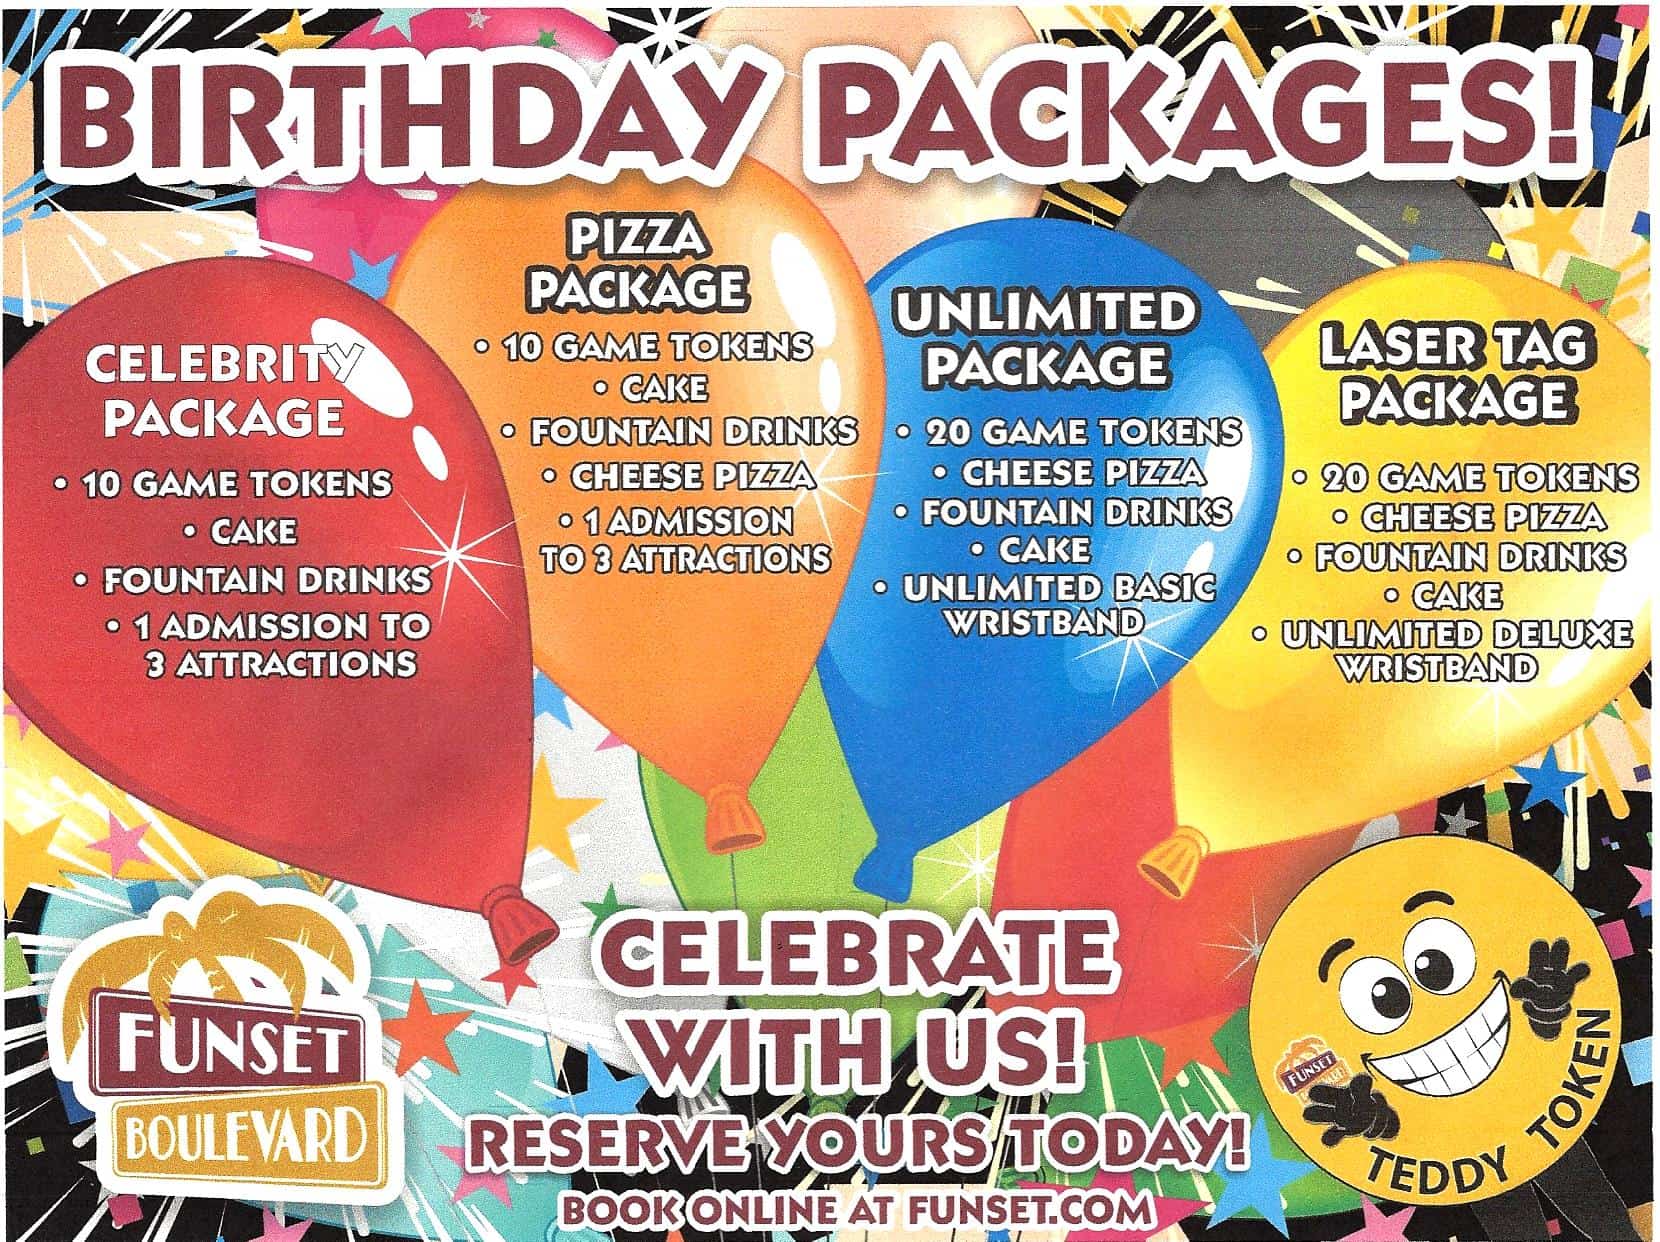 Funset Blvd Party packages